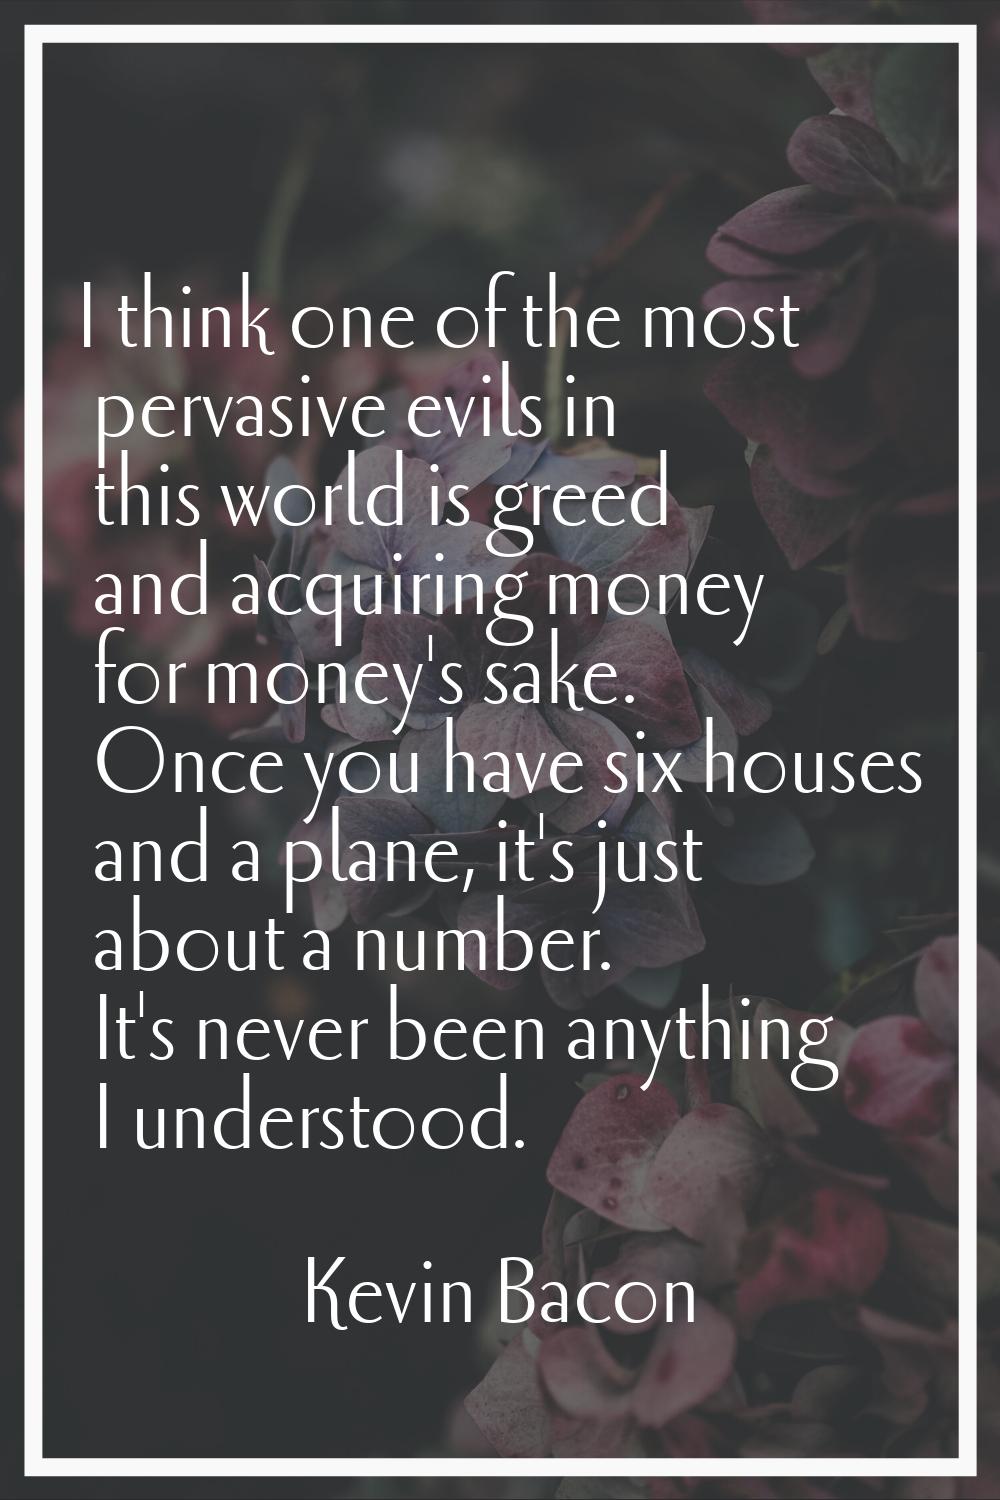 I think one of the most pervasive evils in this world is greed and acquiring money for money's sake